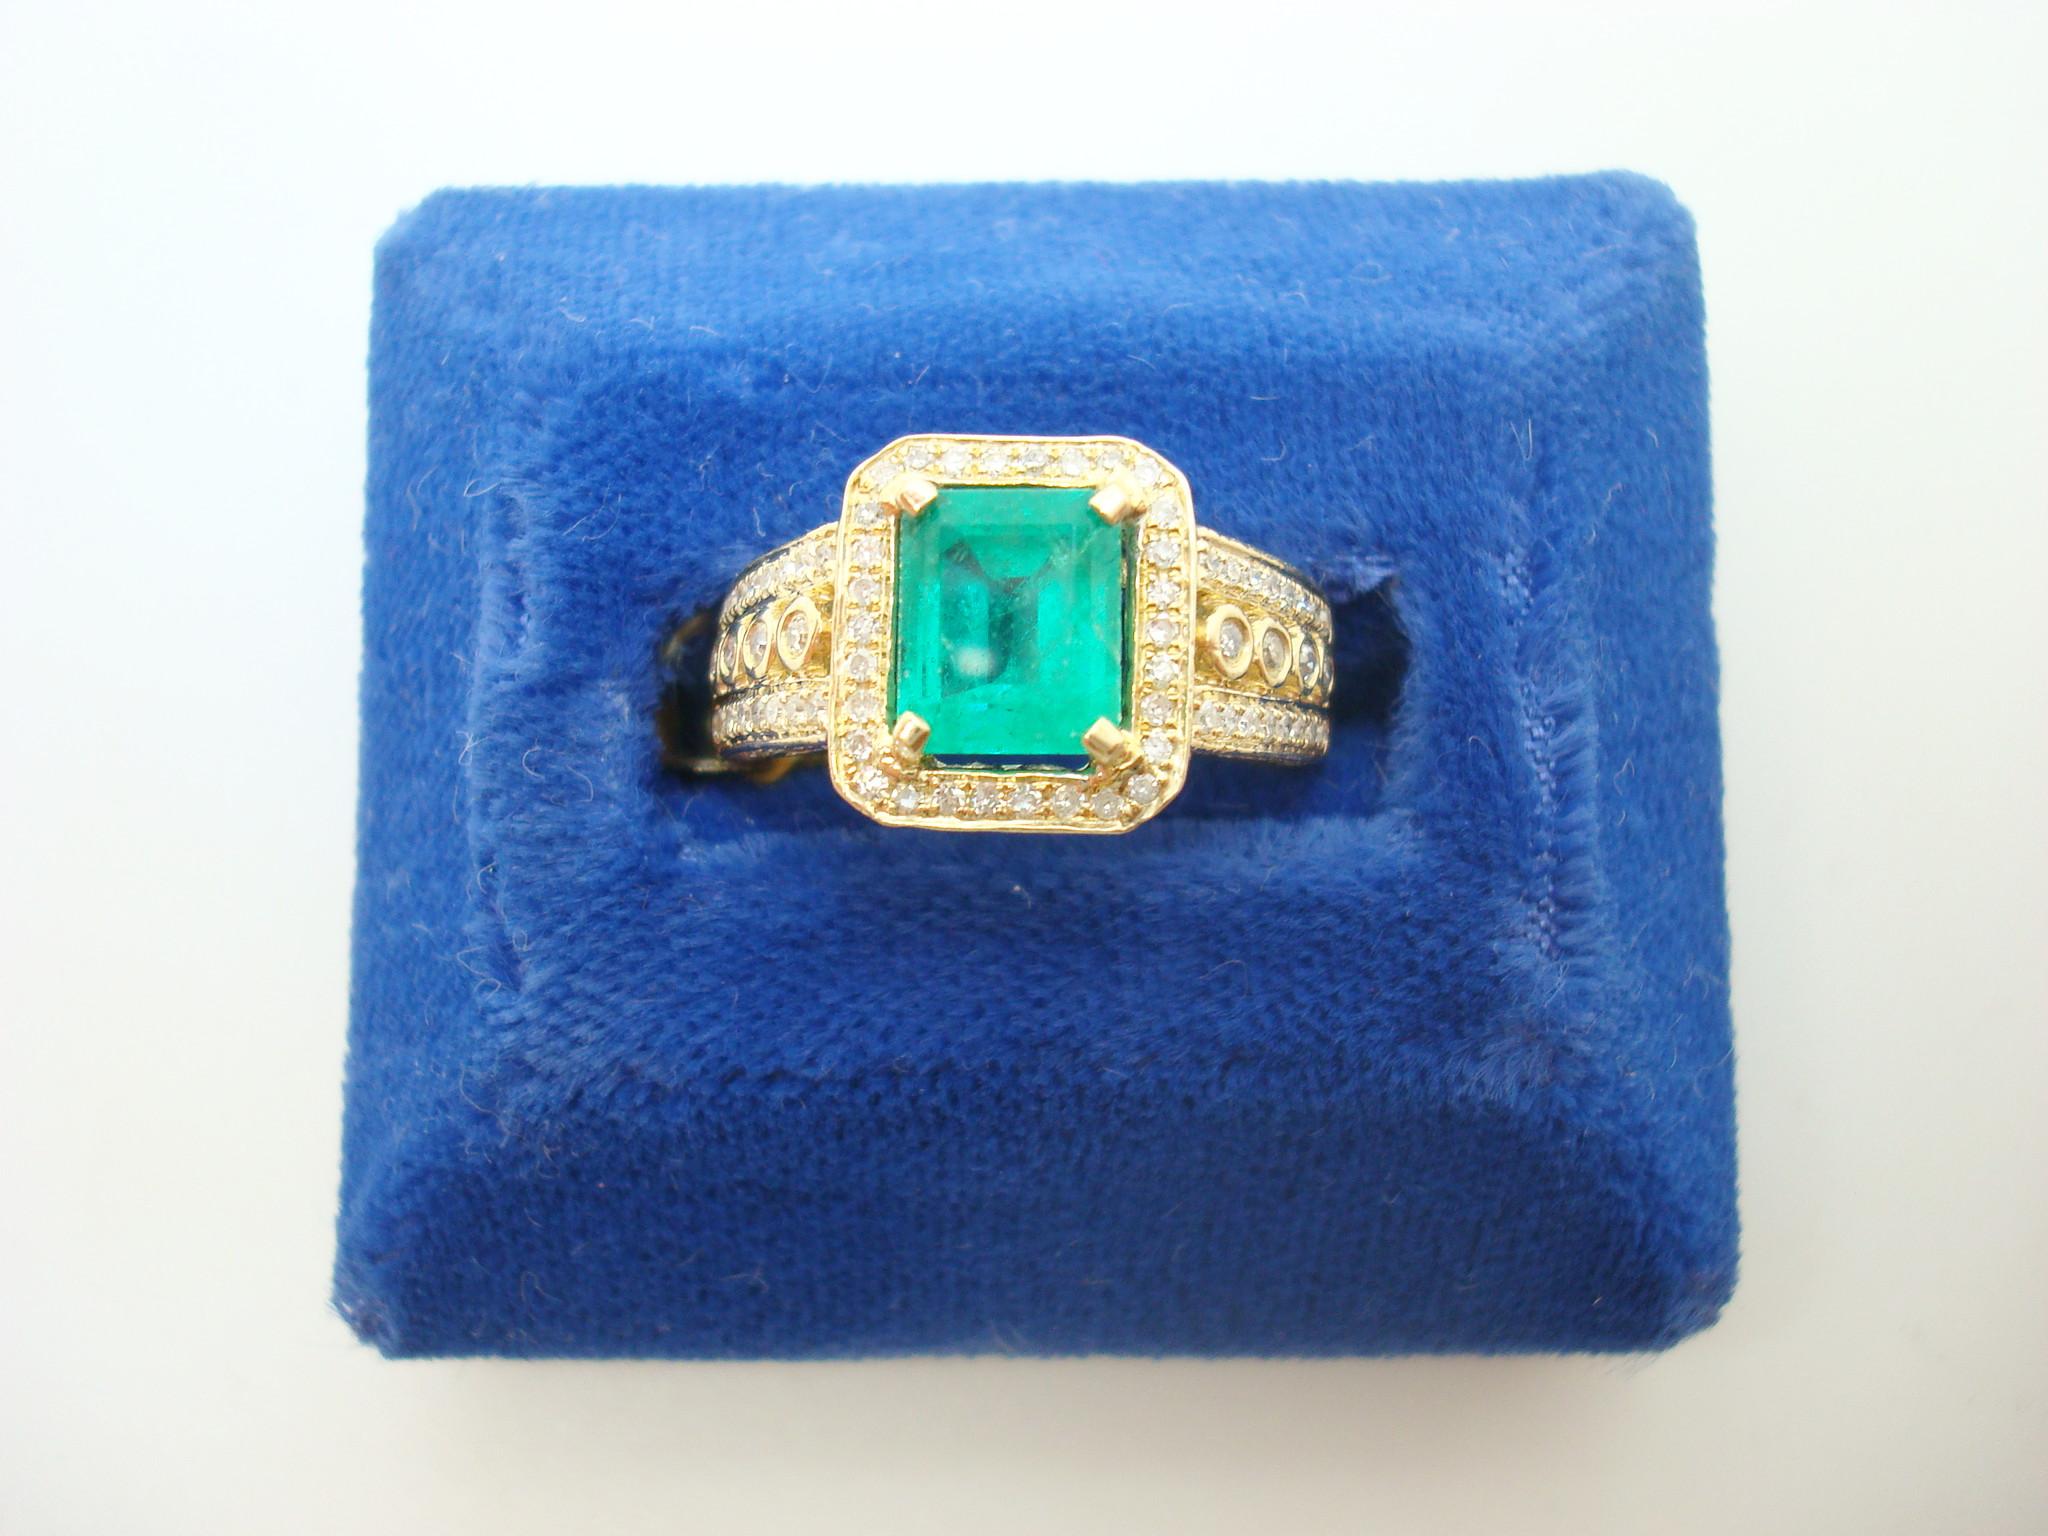 10k Gold 1.62ct Genuine Natural Emerald Ring with 1/4ct Diamonds (#J2604)

10k yellow gold ring featuring a 1.62 carat emerald cut emerald with fabulous grass green color. It measures 7x6mm. The emerald is accented by round diamonds measuring 1-2mm